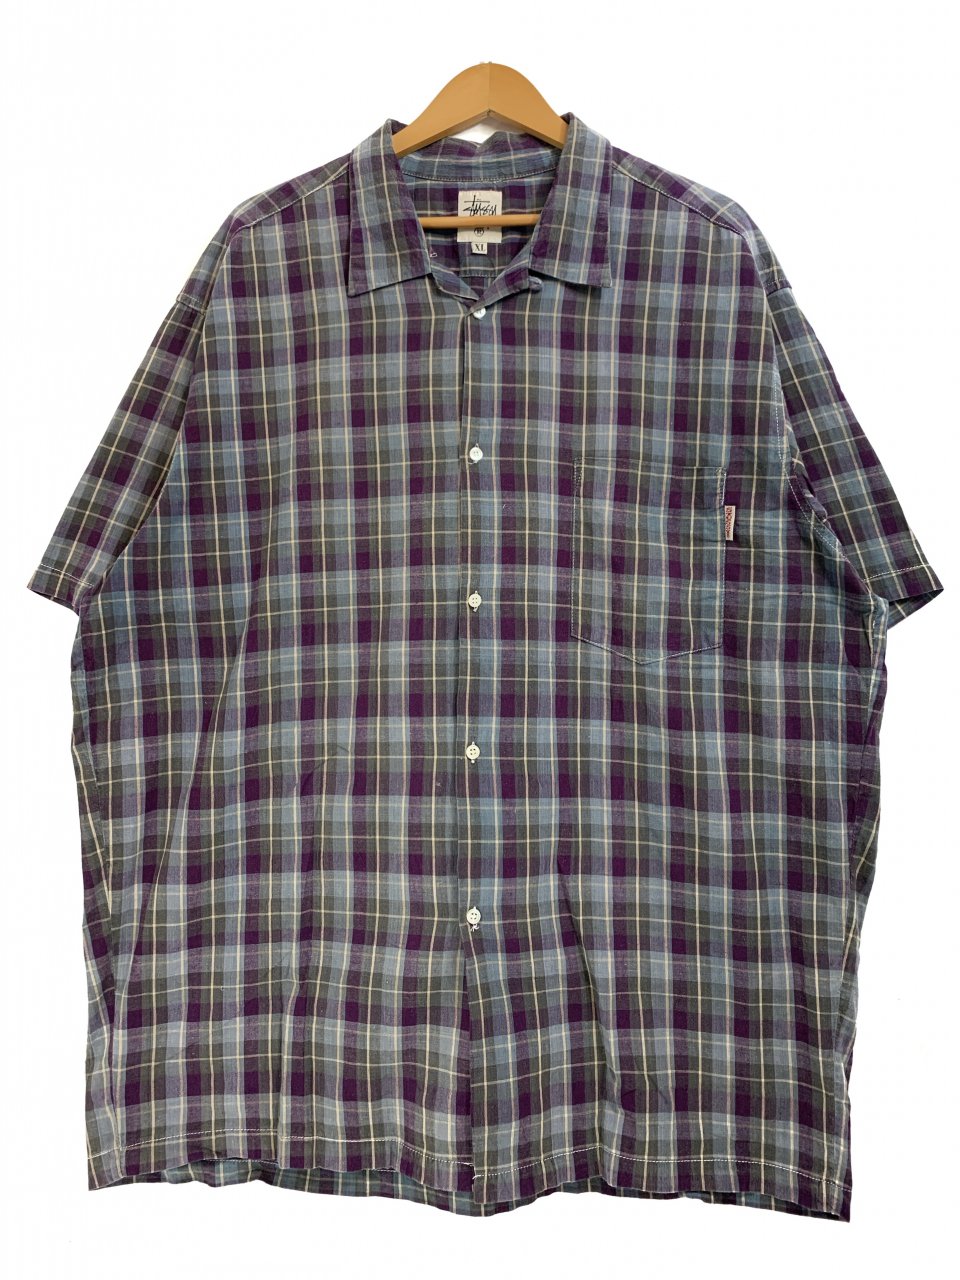 USA製 90s OLD STUSSY Check Cotton Open Collar S/S Shirt 紫 XL 白 